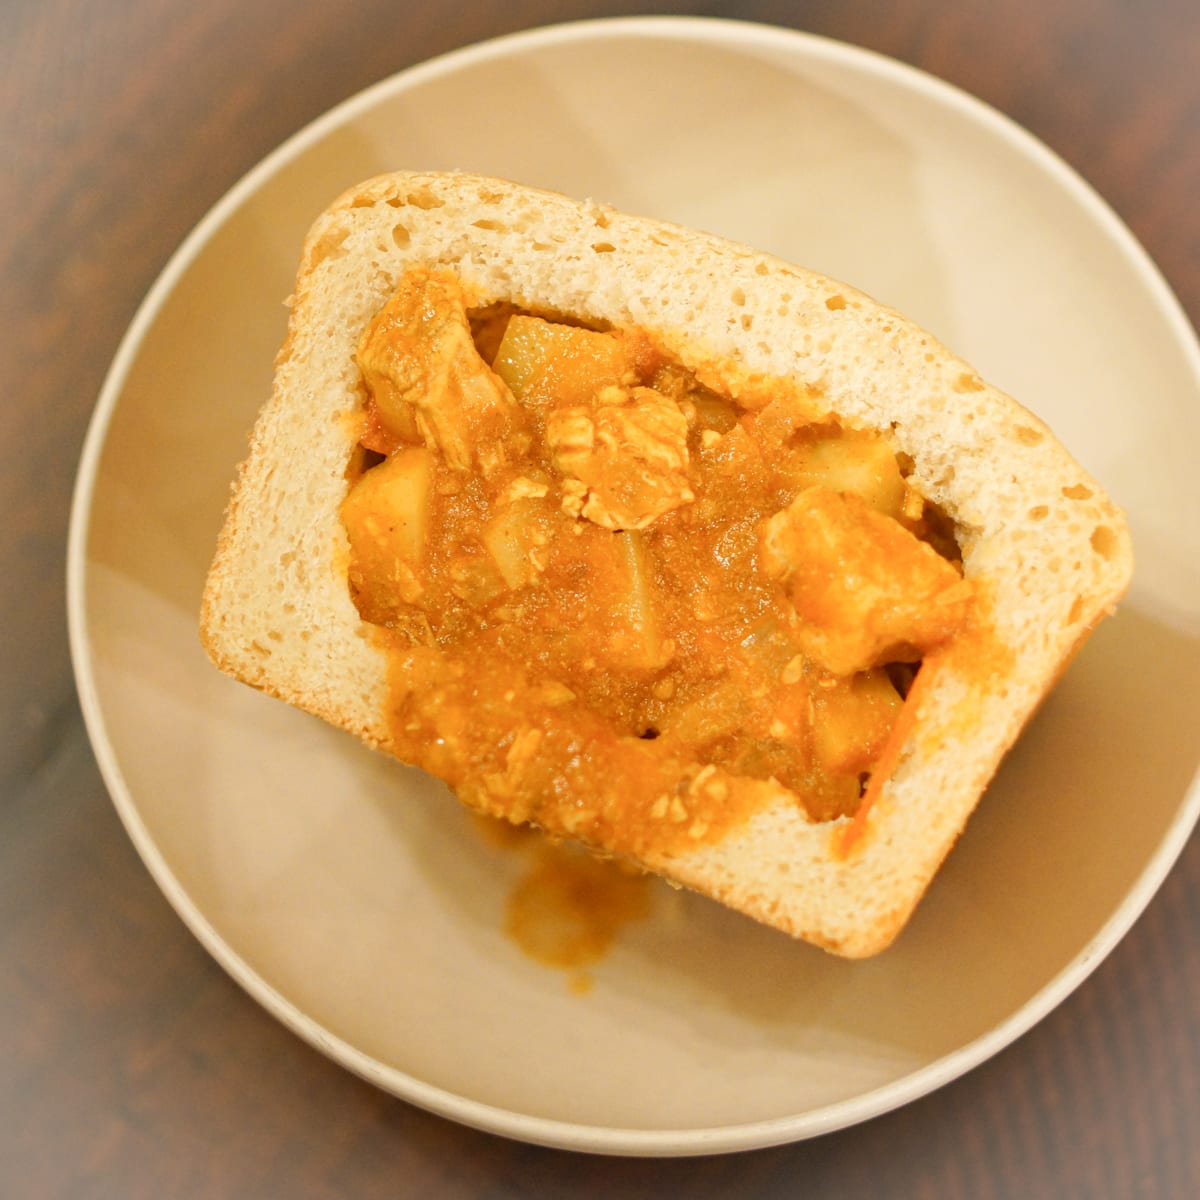 South African Bunny Chow with Durban curry.